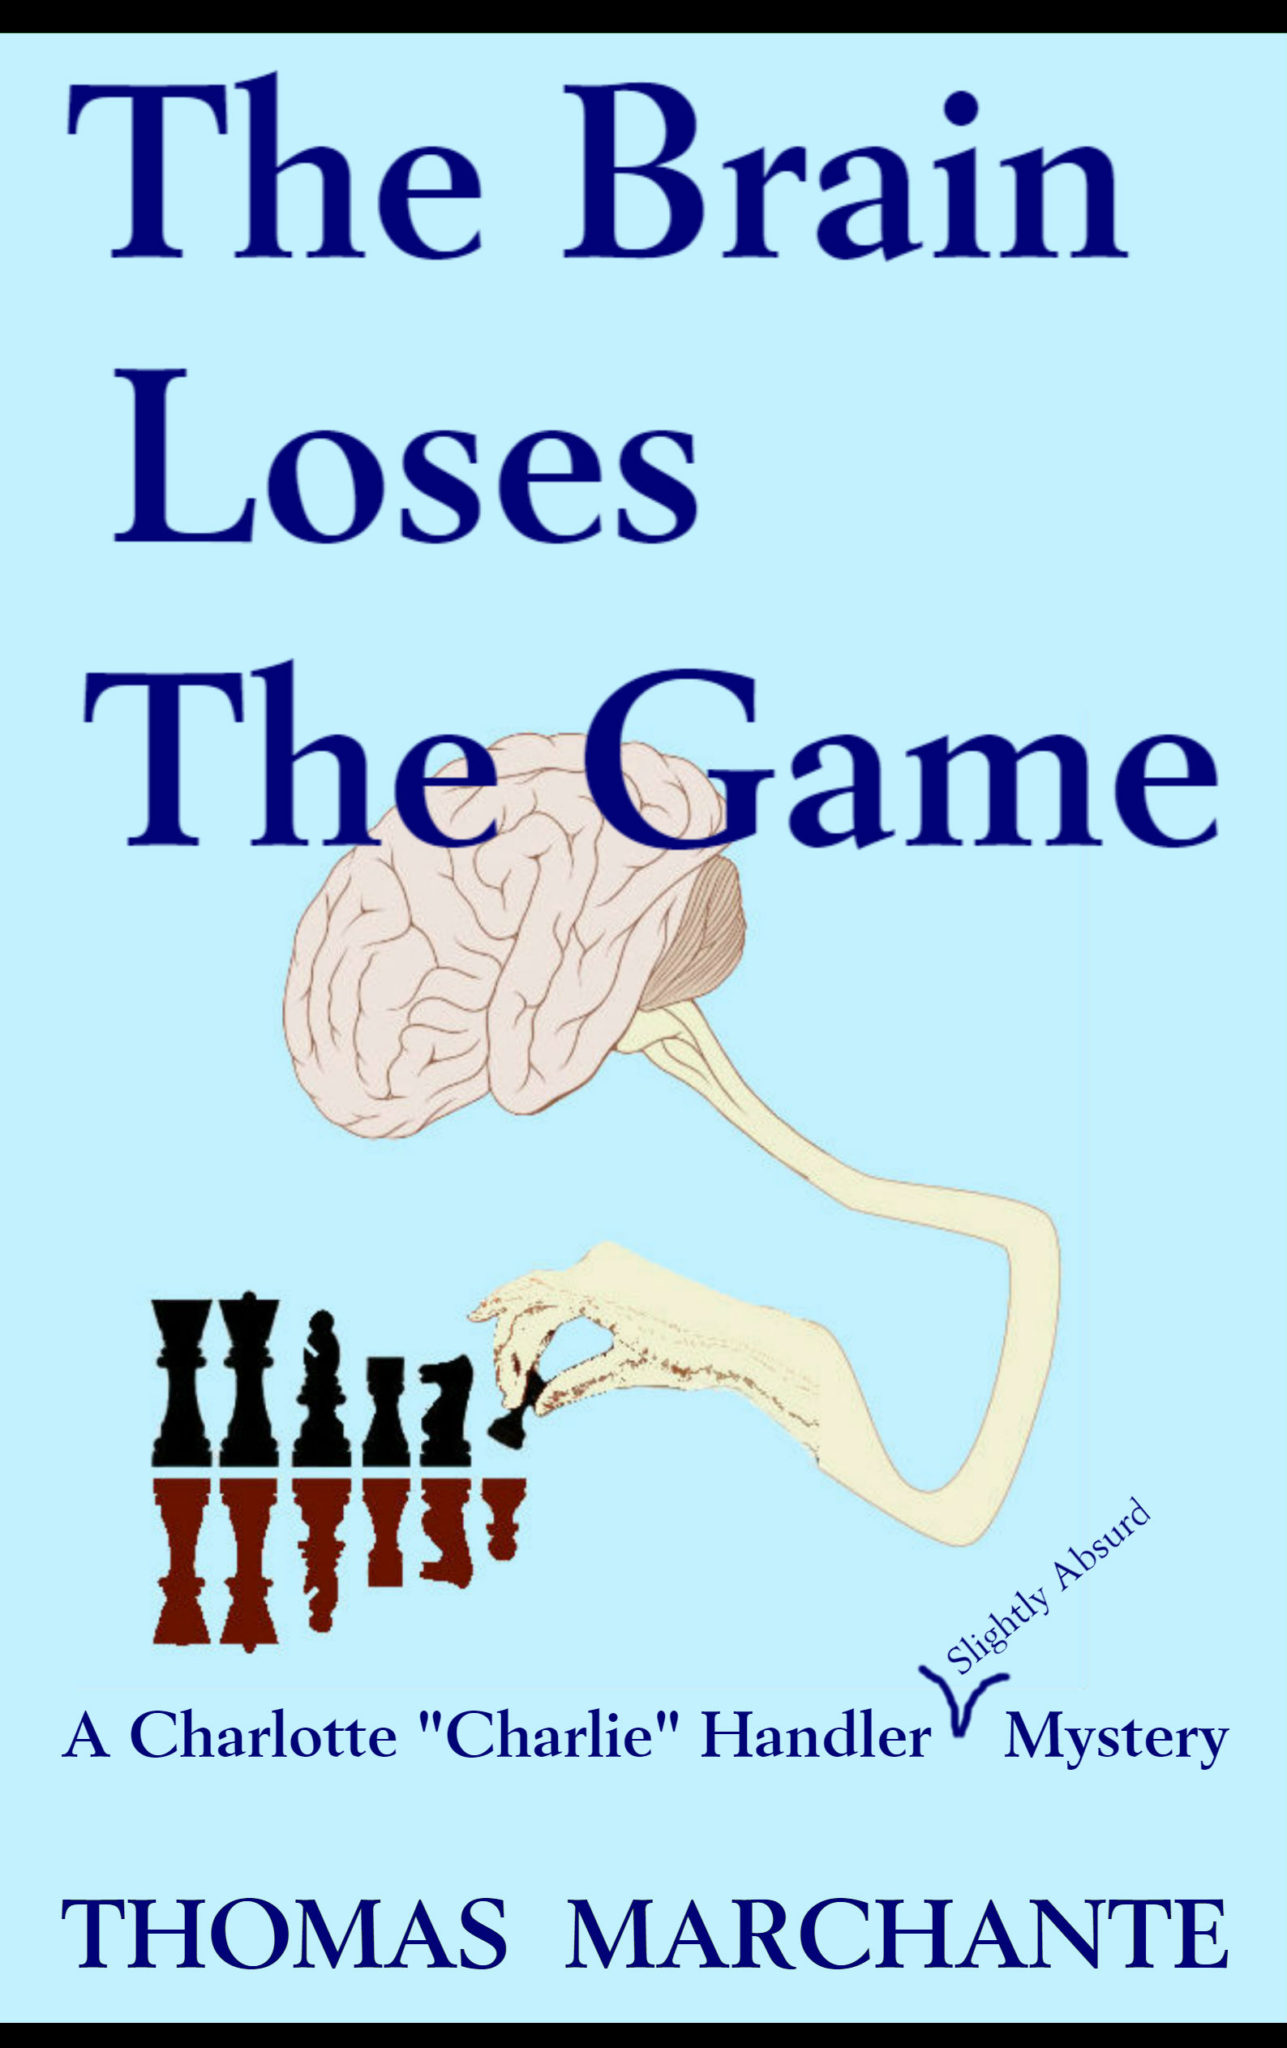 FREE: The Brain Loses The Game by Thomas Marchante